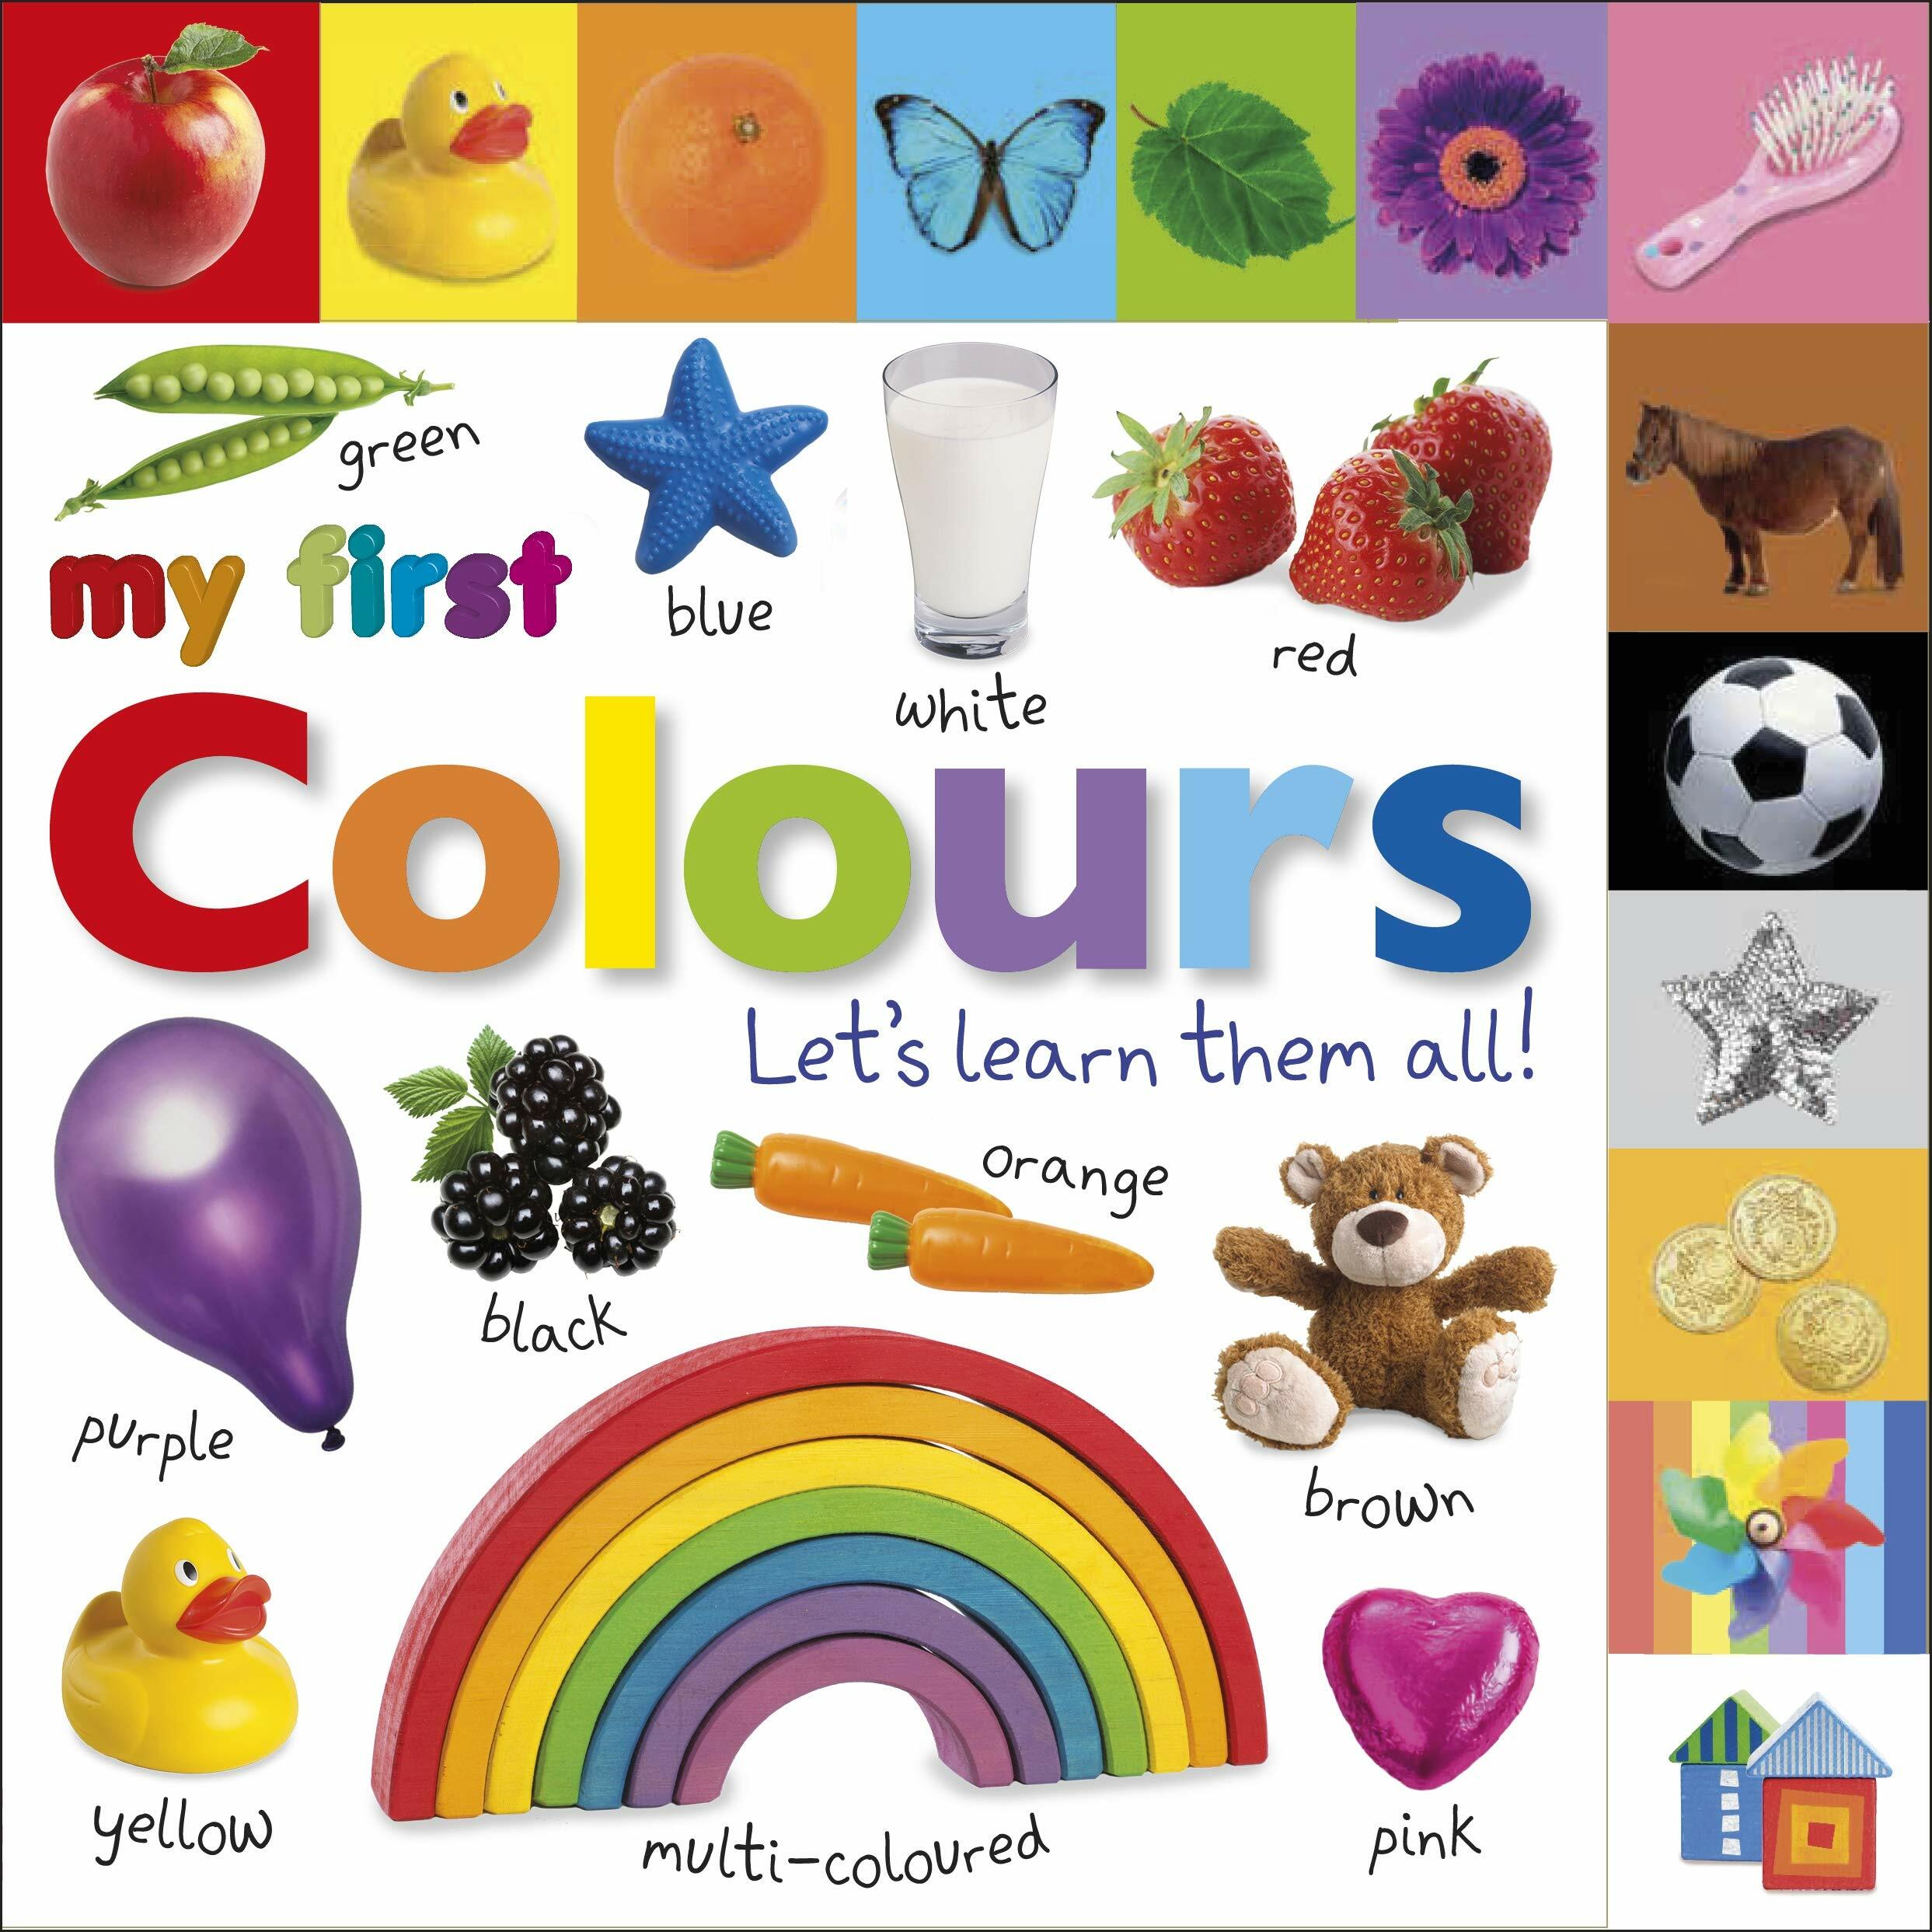 My First Colours Lets Learn Them All (Board Book)